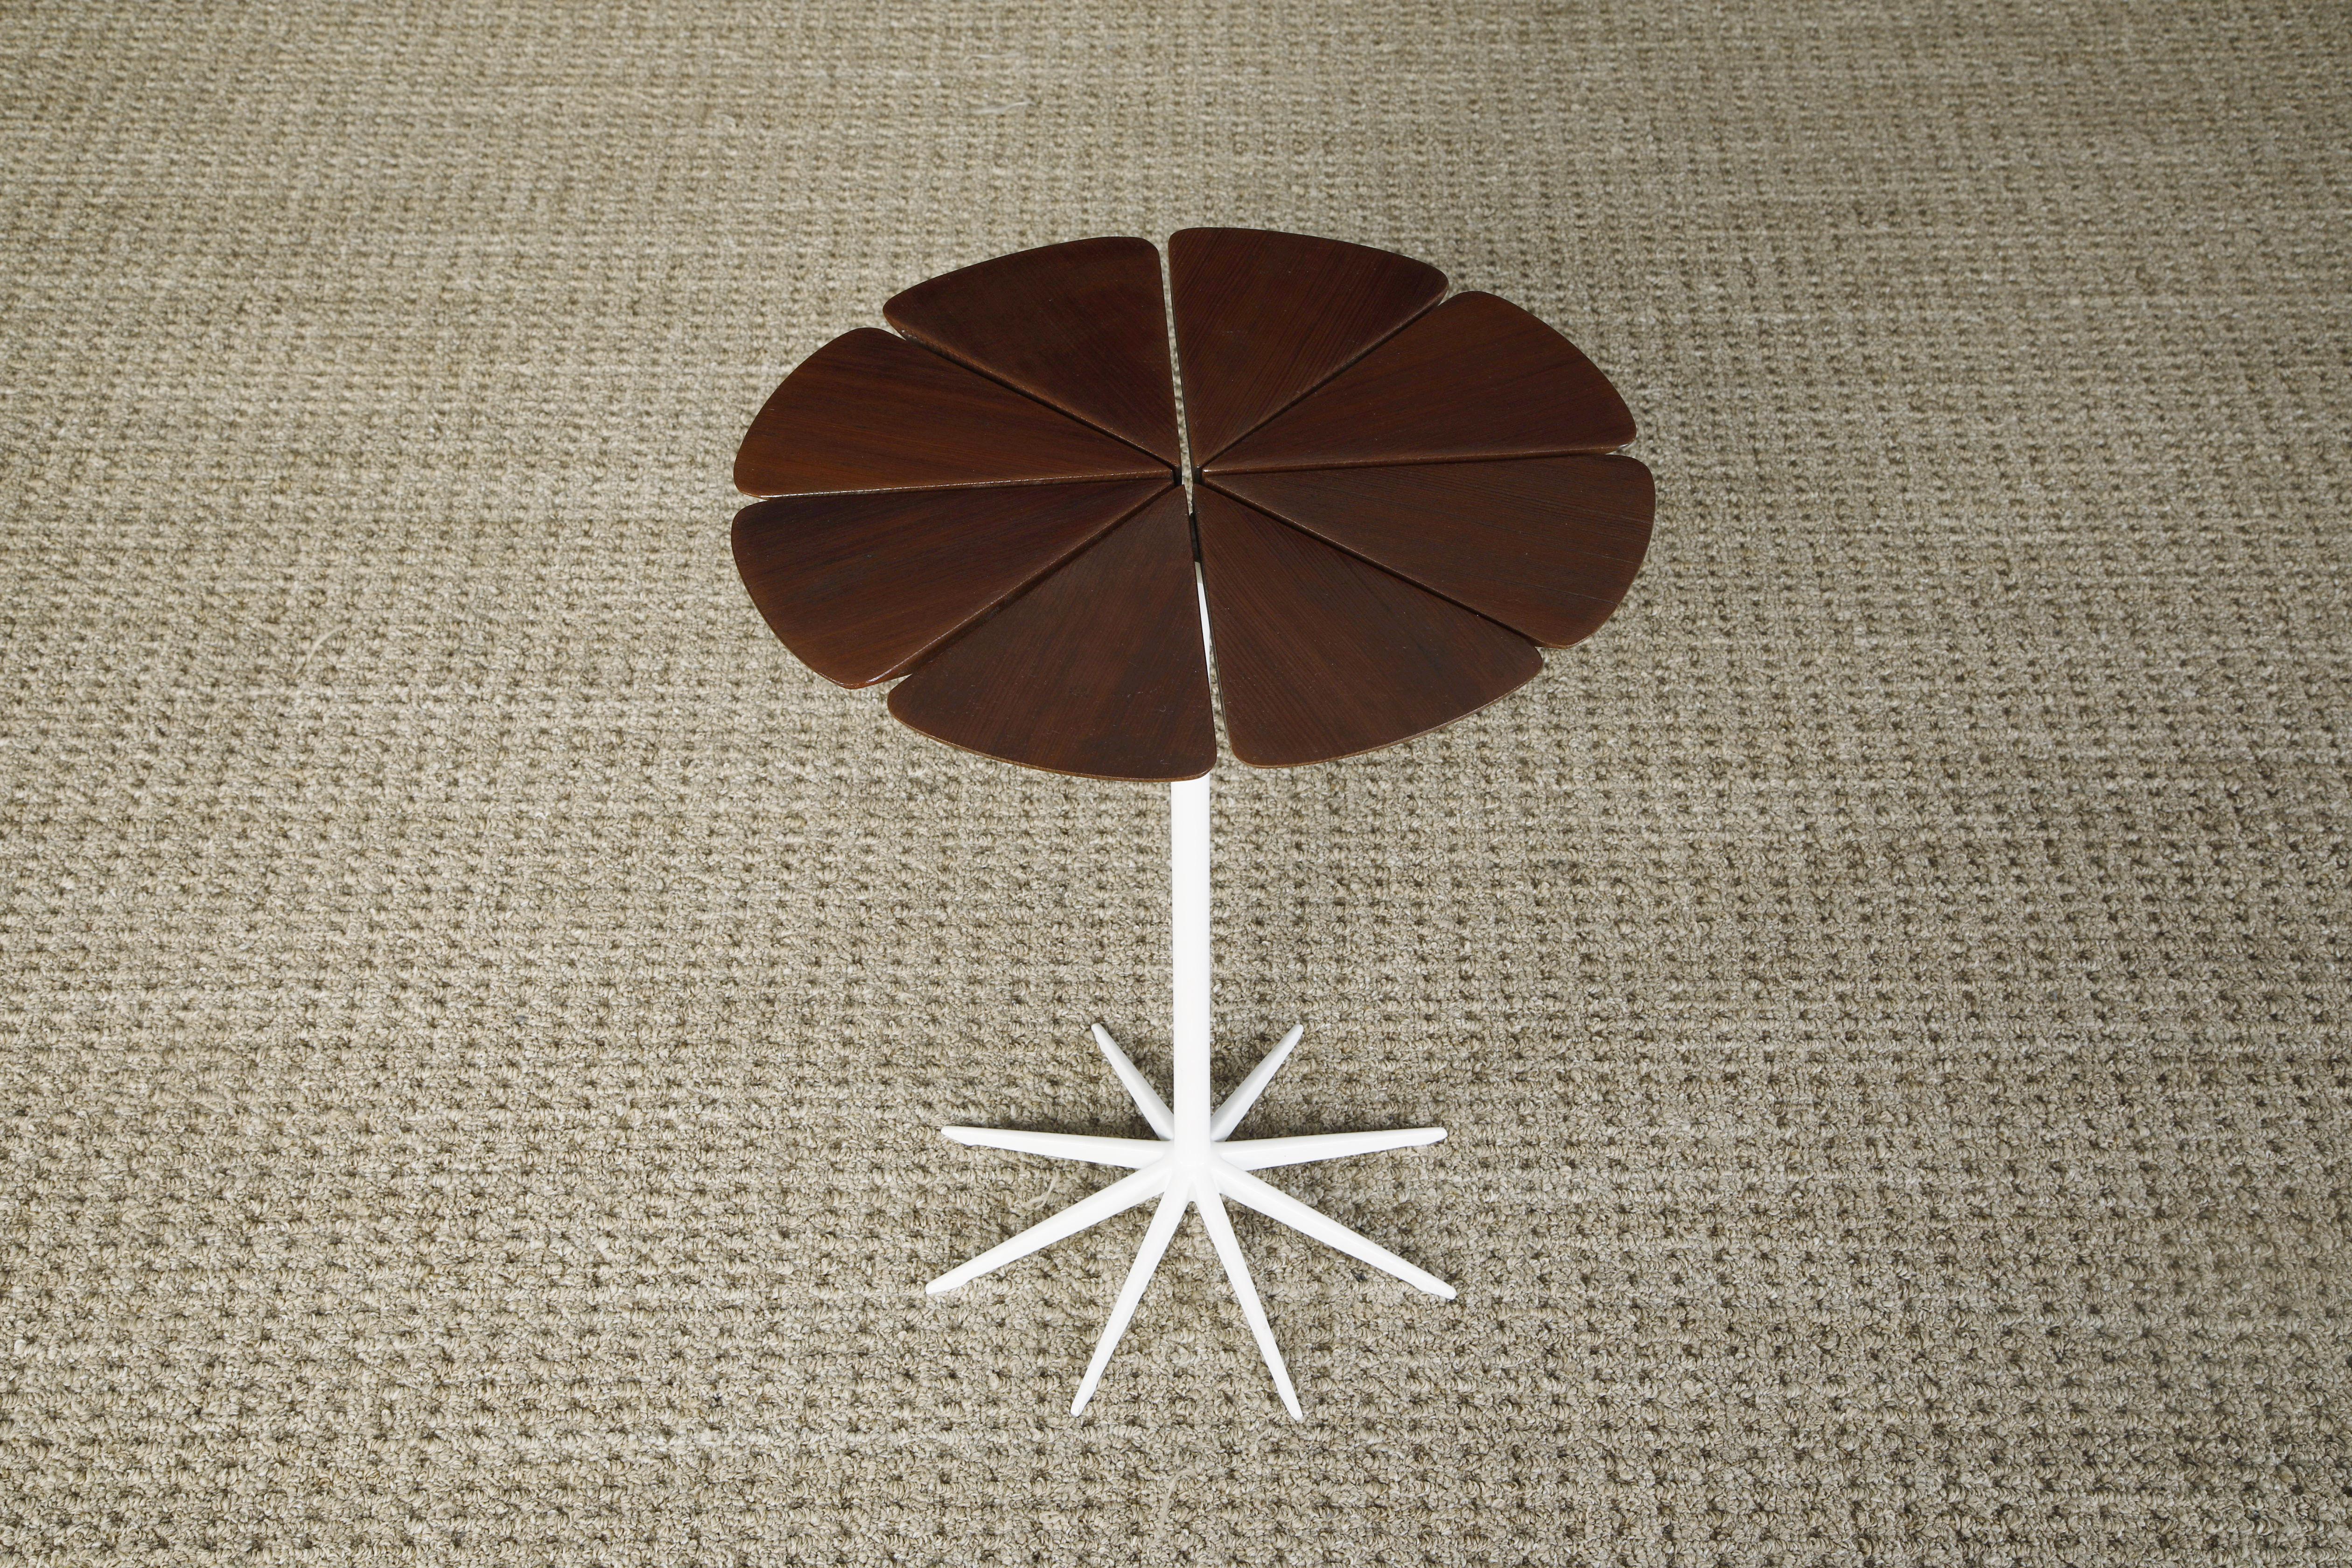 This signed early production 'Petal' drinks table by Richard Schultz for Knoll Associates, designed in 1960, is a favorite amongst Mid-Century Modern collectors and enthusiasts. This side table was refinished and features eight petal sections made